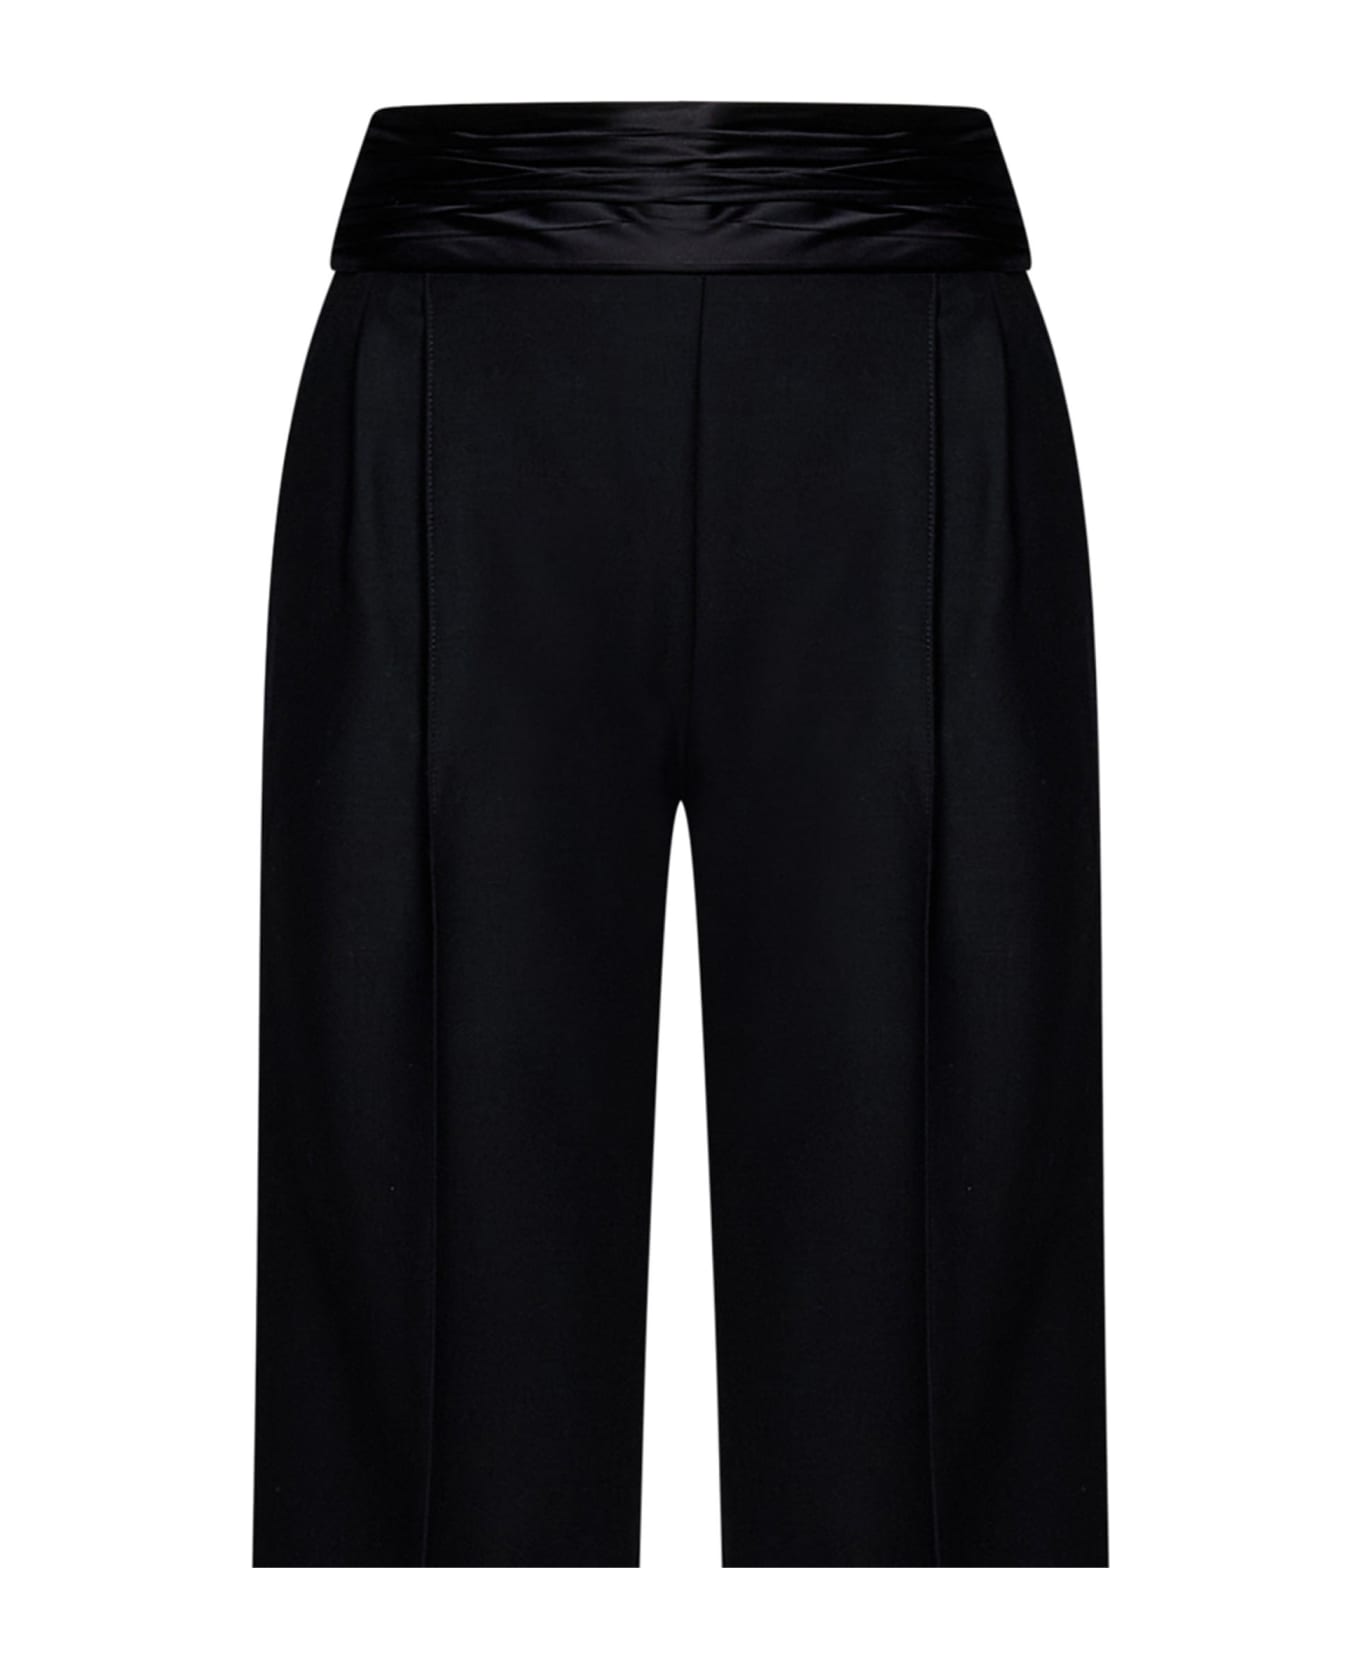 Laquan Smith Trousers - Black ボトムス